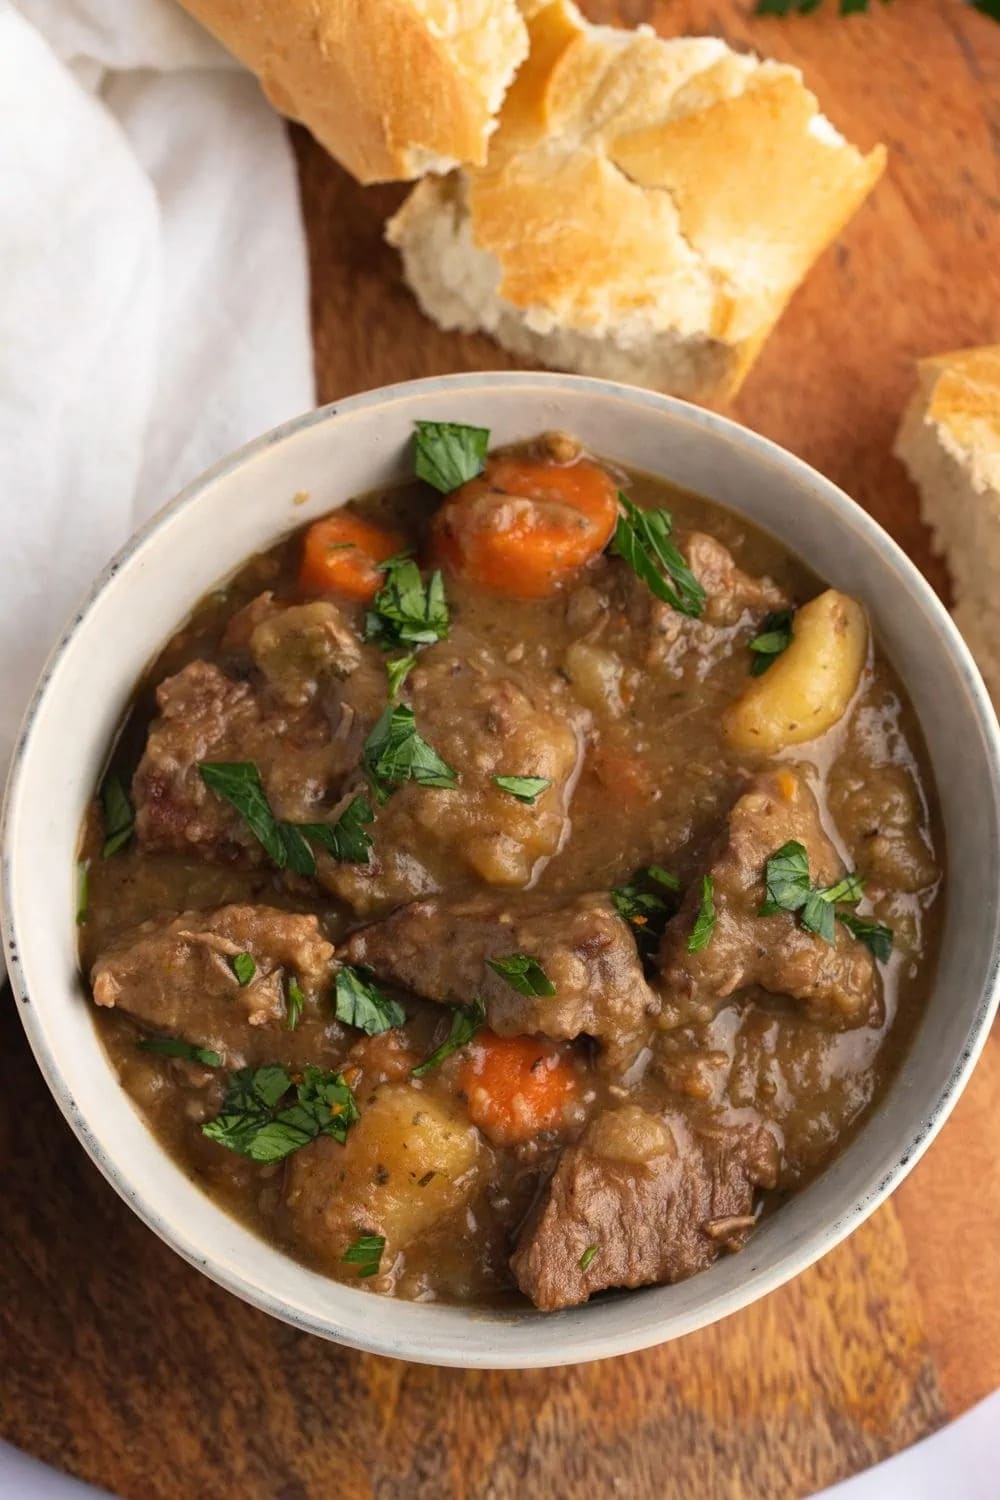 Beef Stew with Carrots and Potatoes Served with Bread